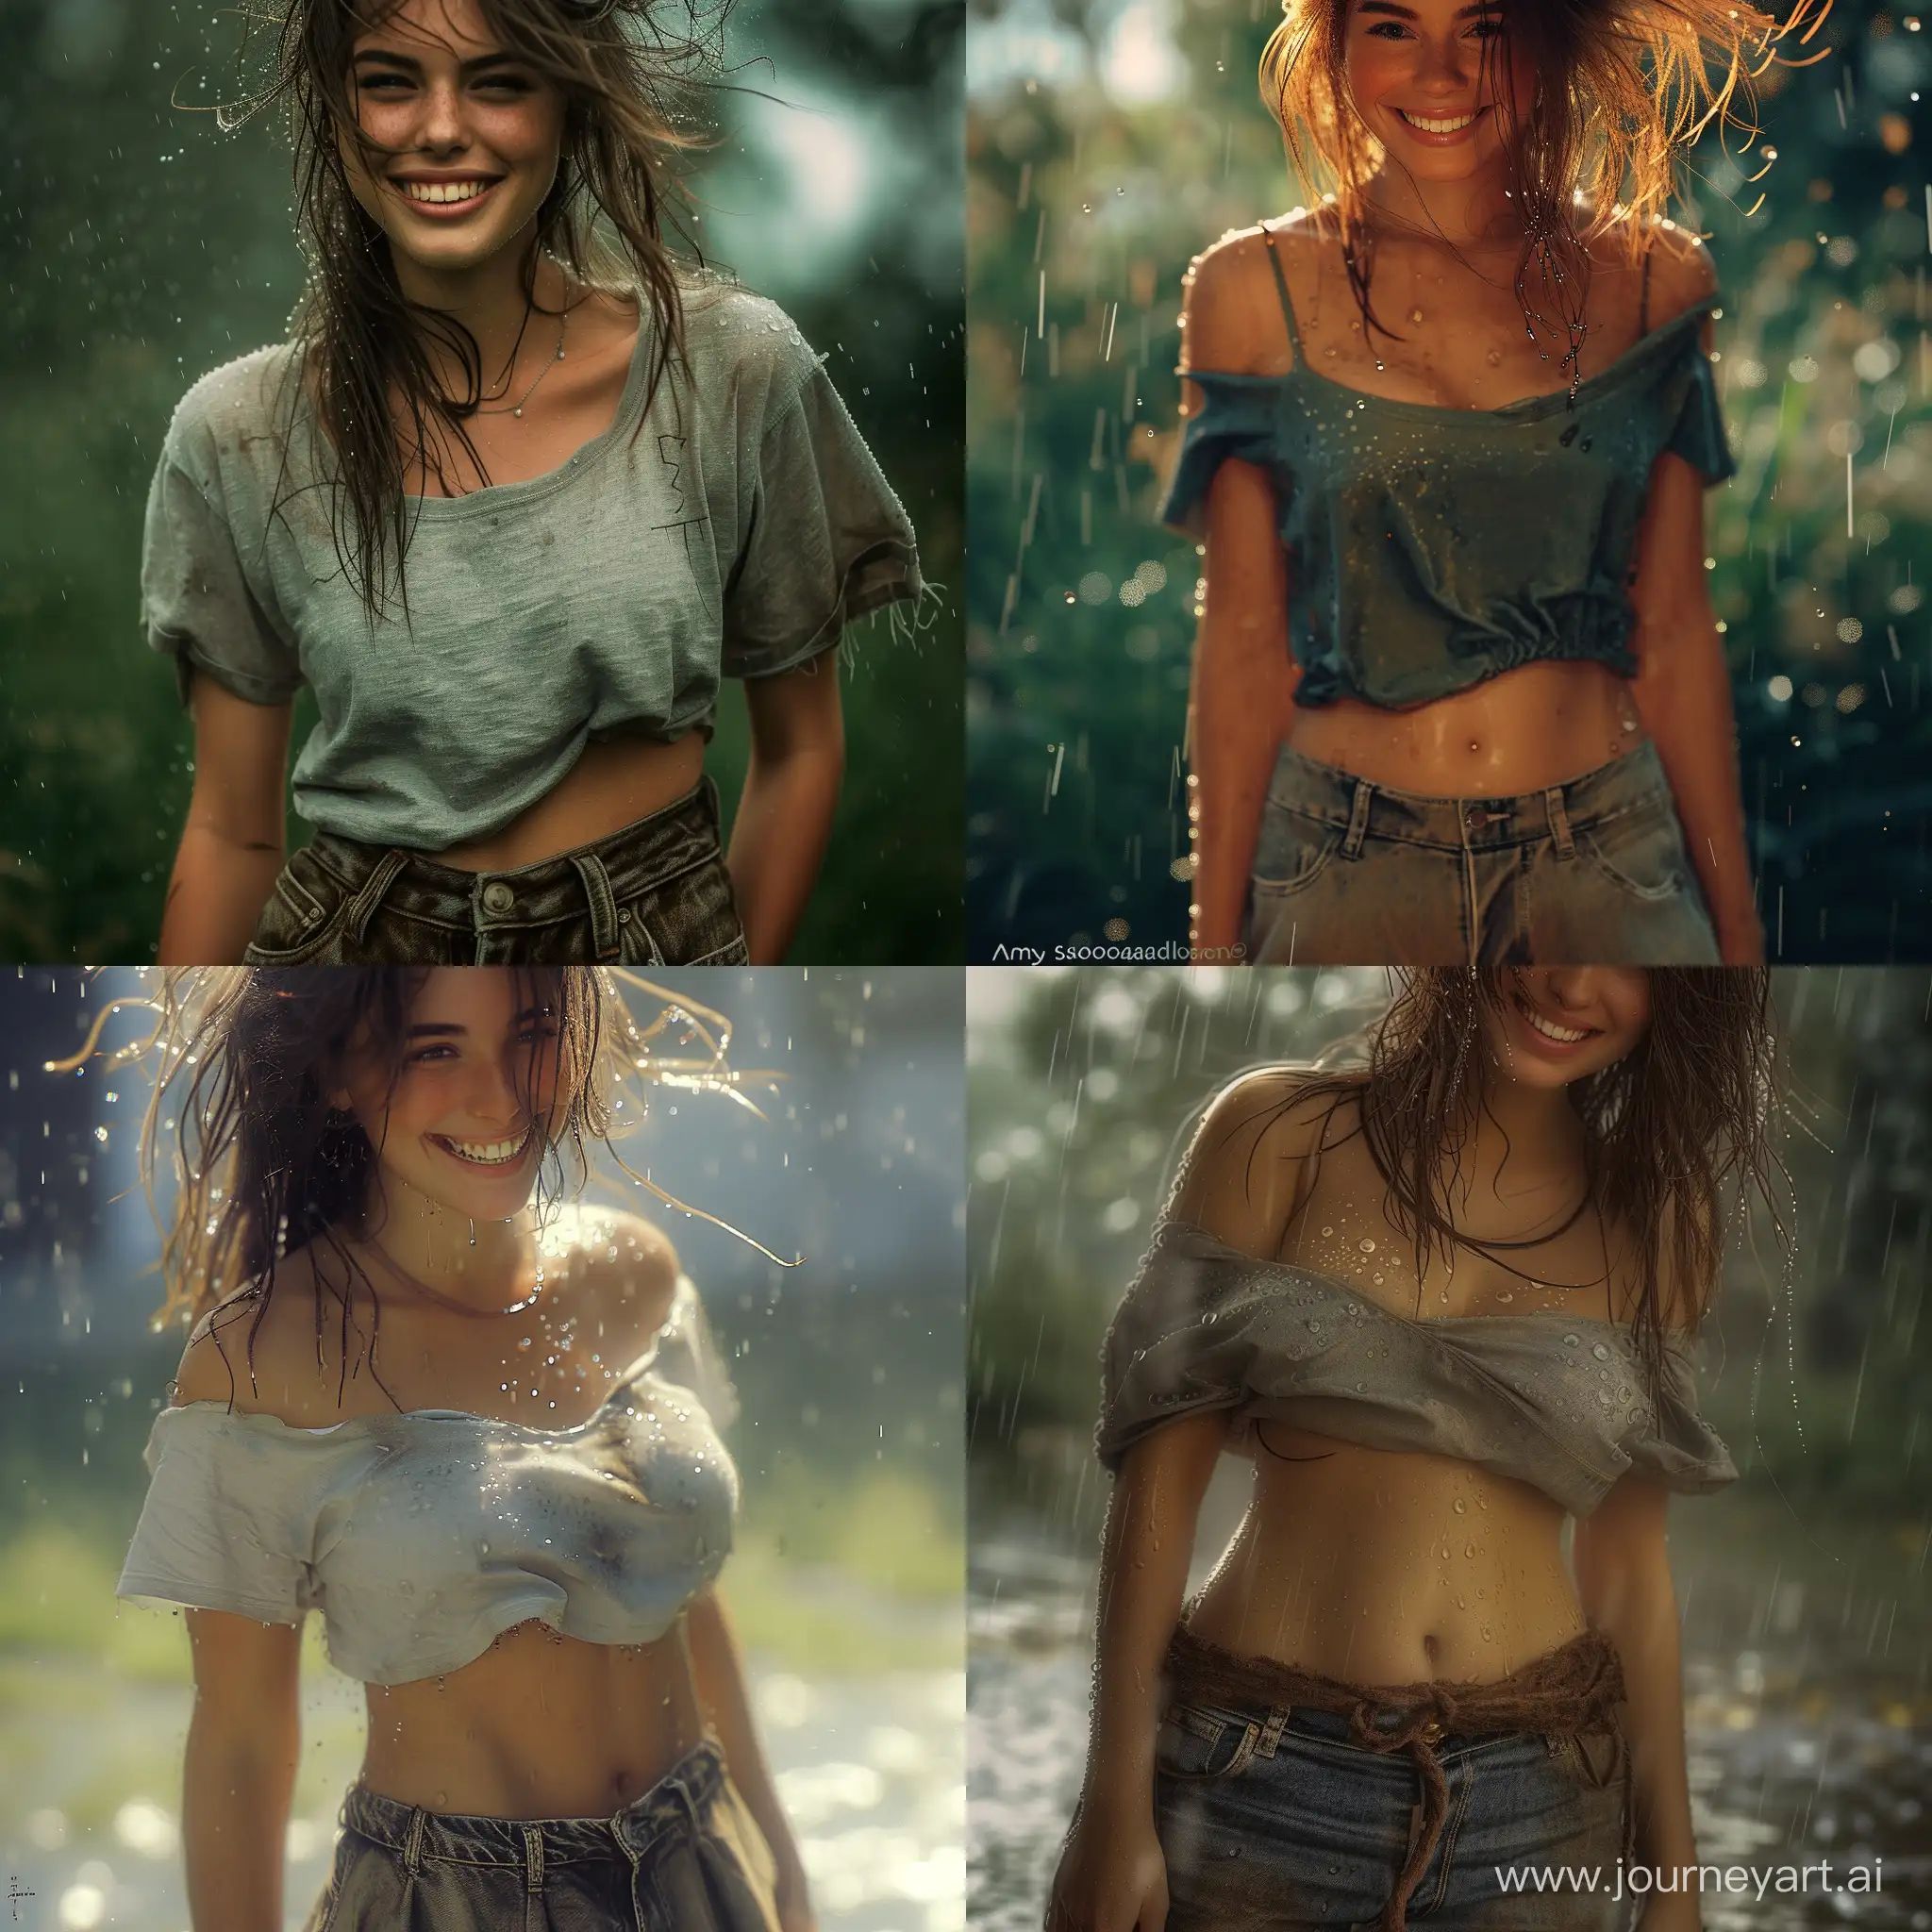 Rainy-TShirt-Contest-Smiling-Woman-with-Realistic-Detail